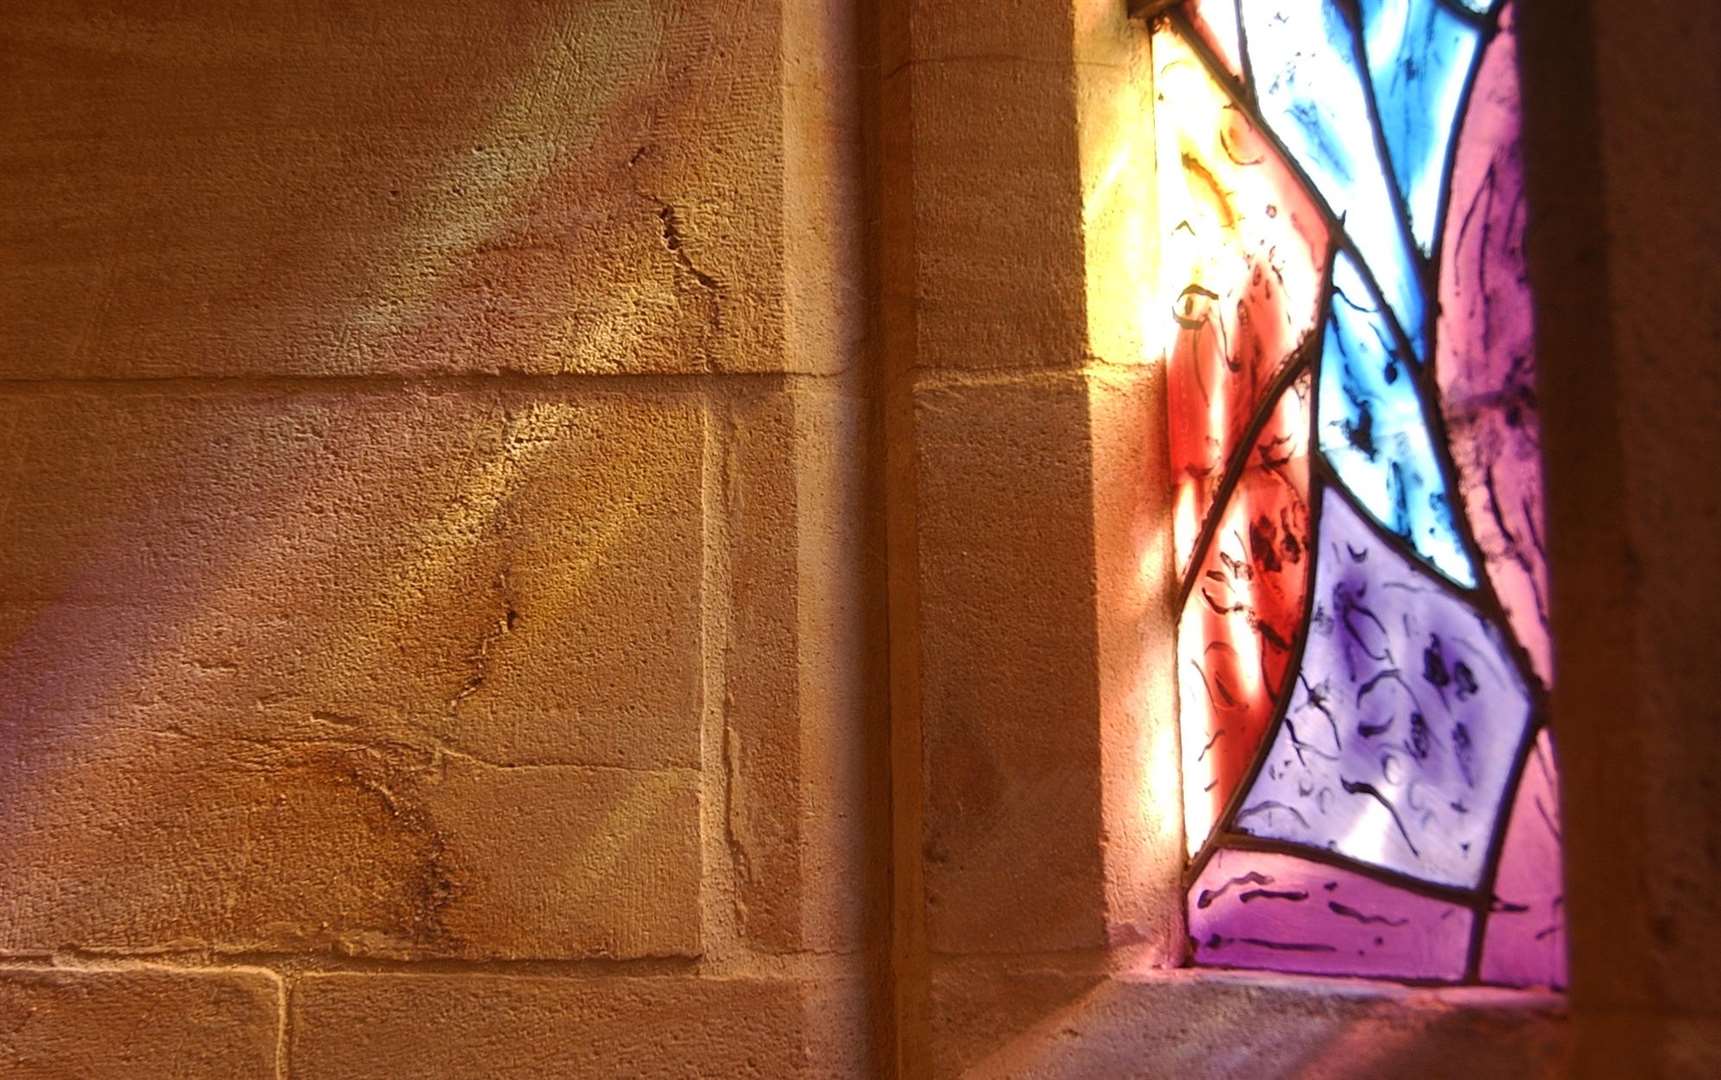 The Chagal stained glass windows at Tudeley church are inspiration for one of the concerts